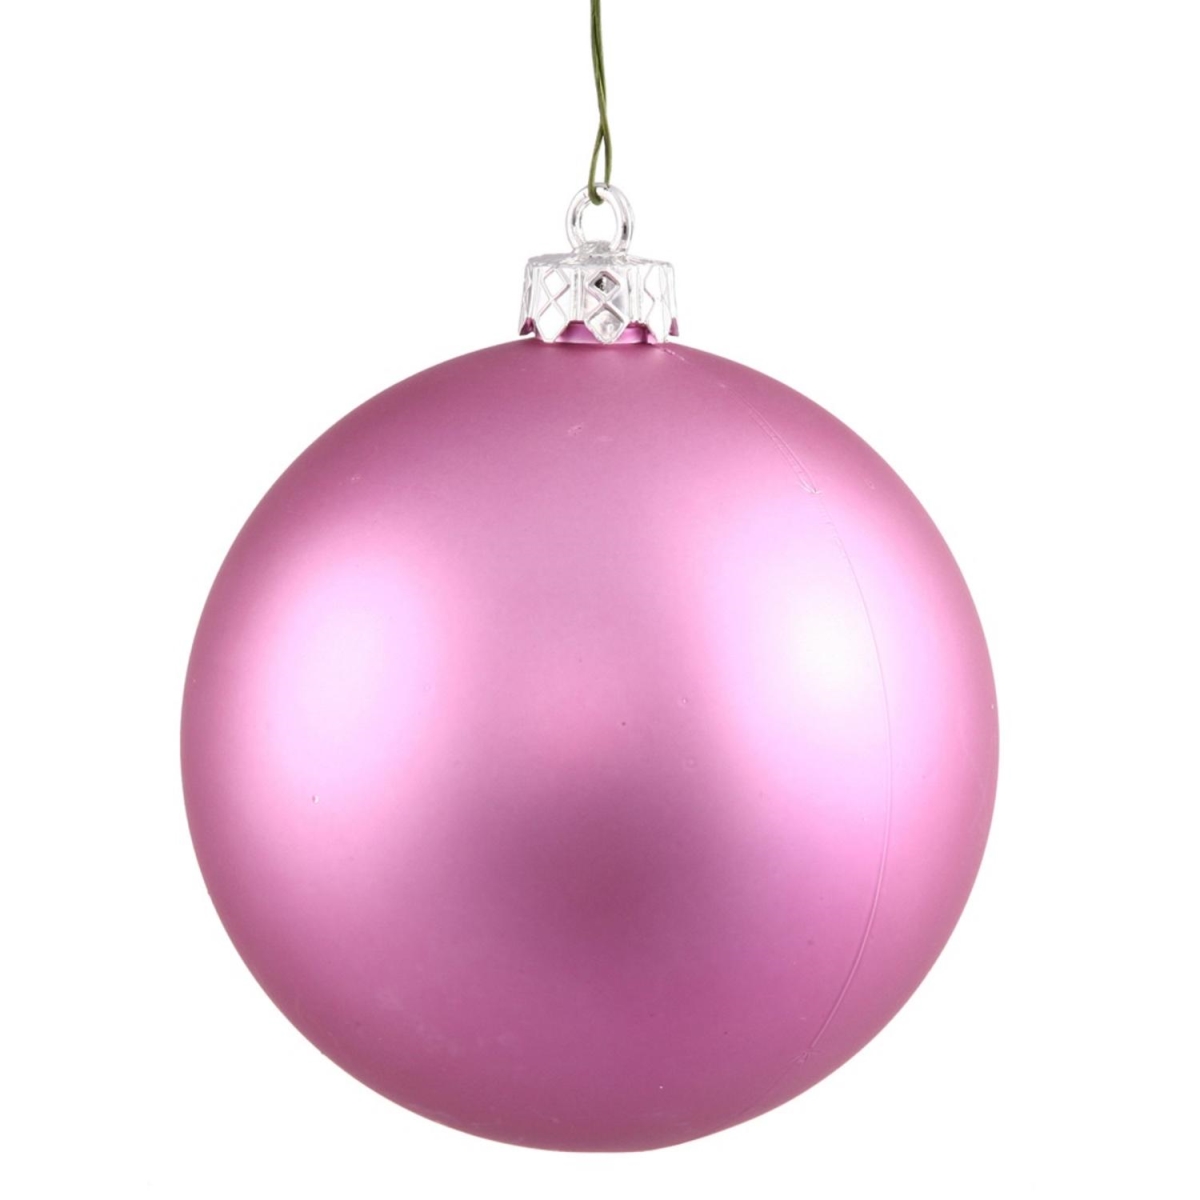 31749396 Matte Orchid Uv Resistant Commercial Drilled Shatterproof Christmas Ball Ornament - 2.75 In.